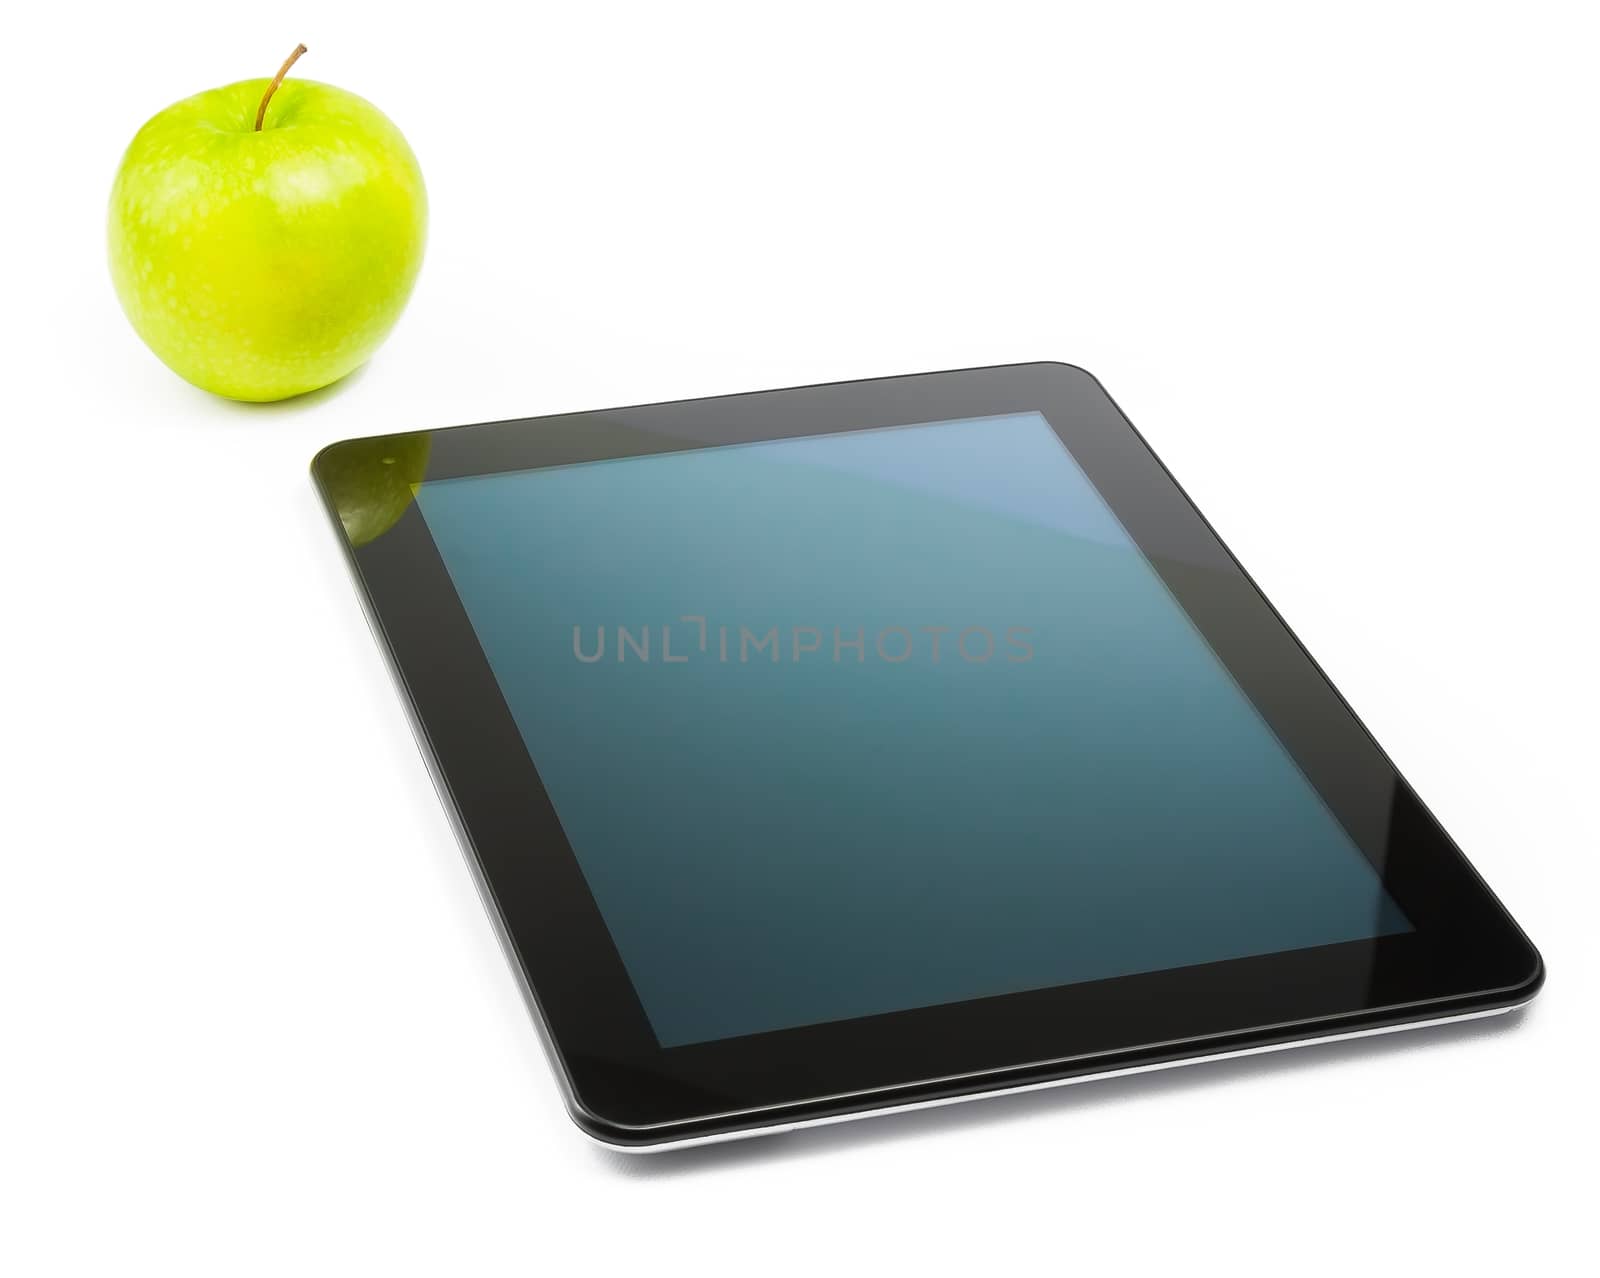 digital tablet pc near green apple on white background by donfiore